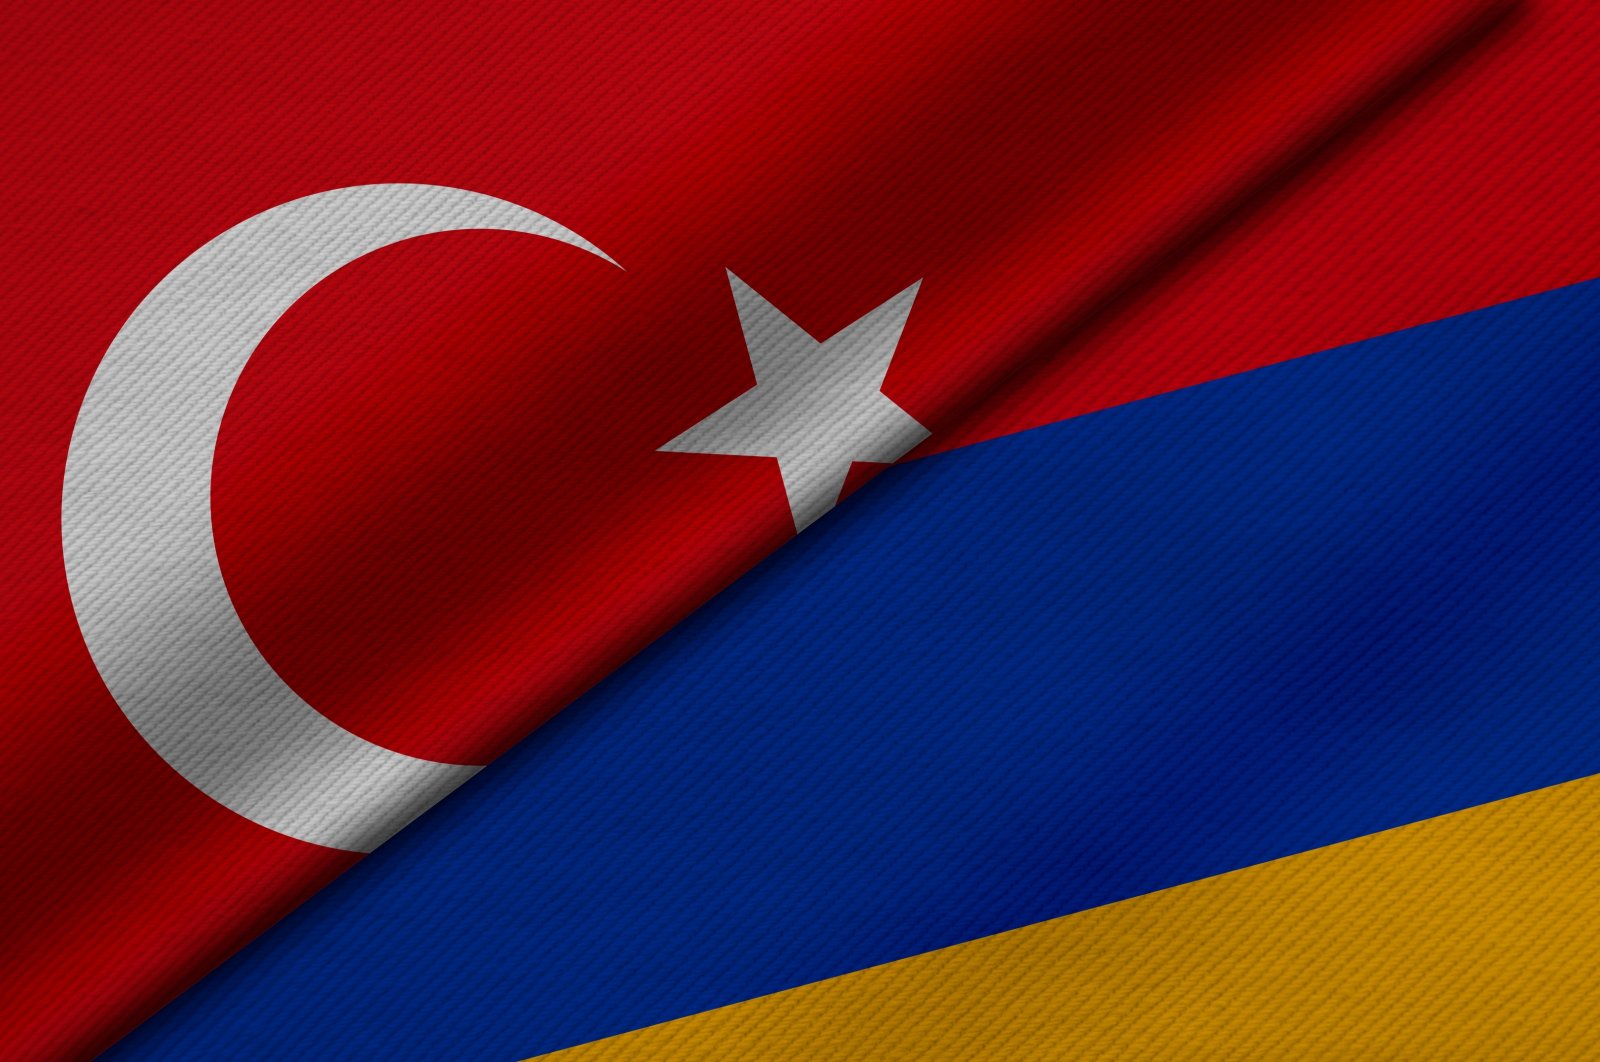 This illustration shows the flags of Turkey and Armenia.